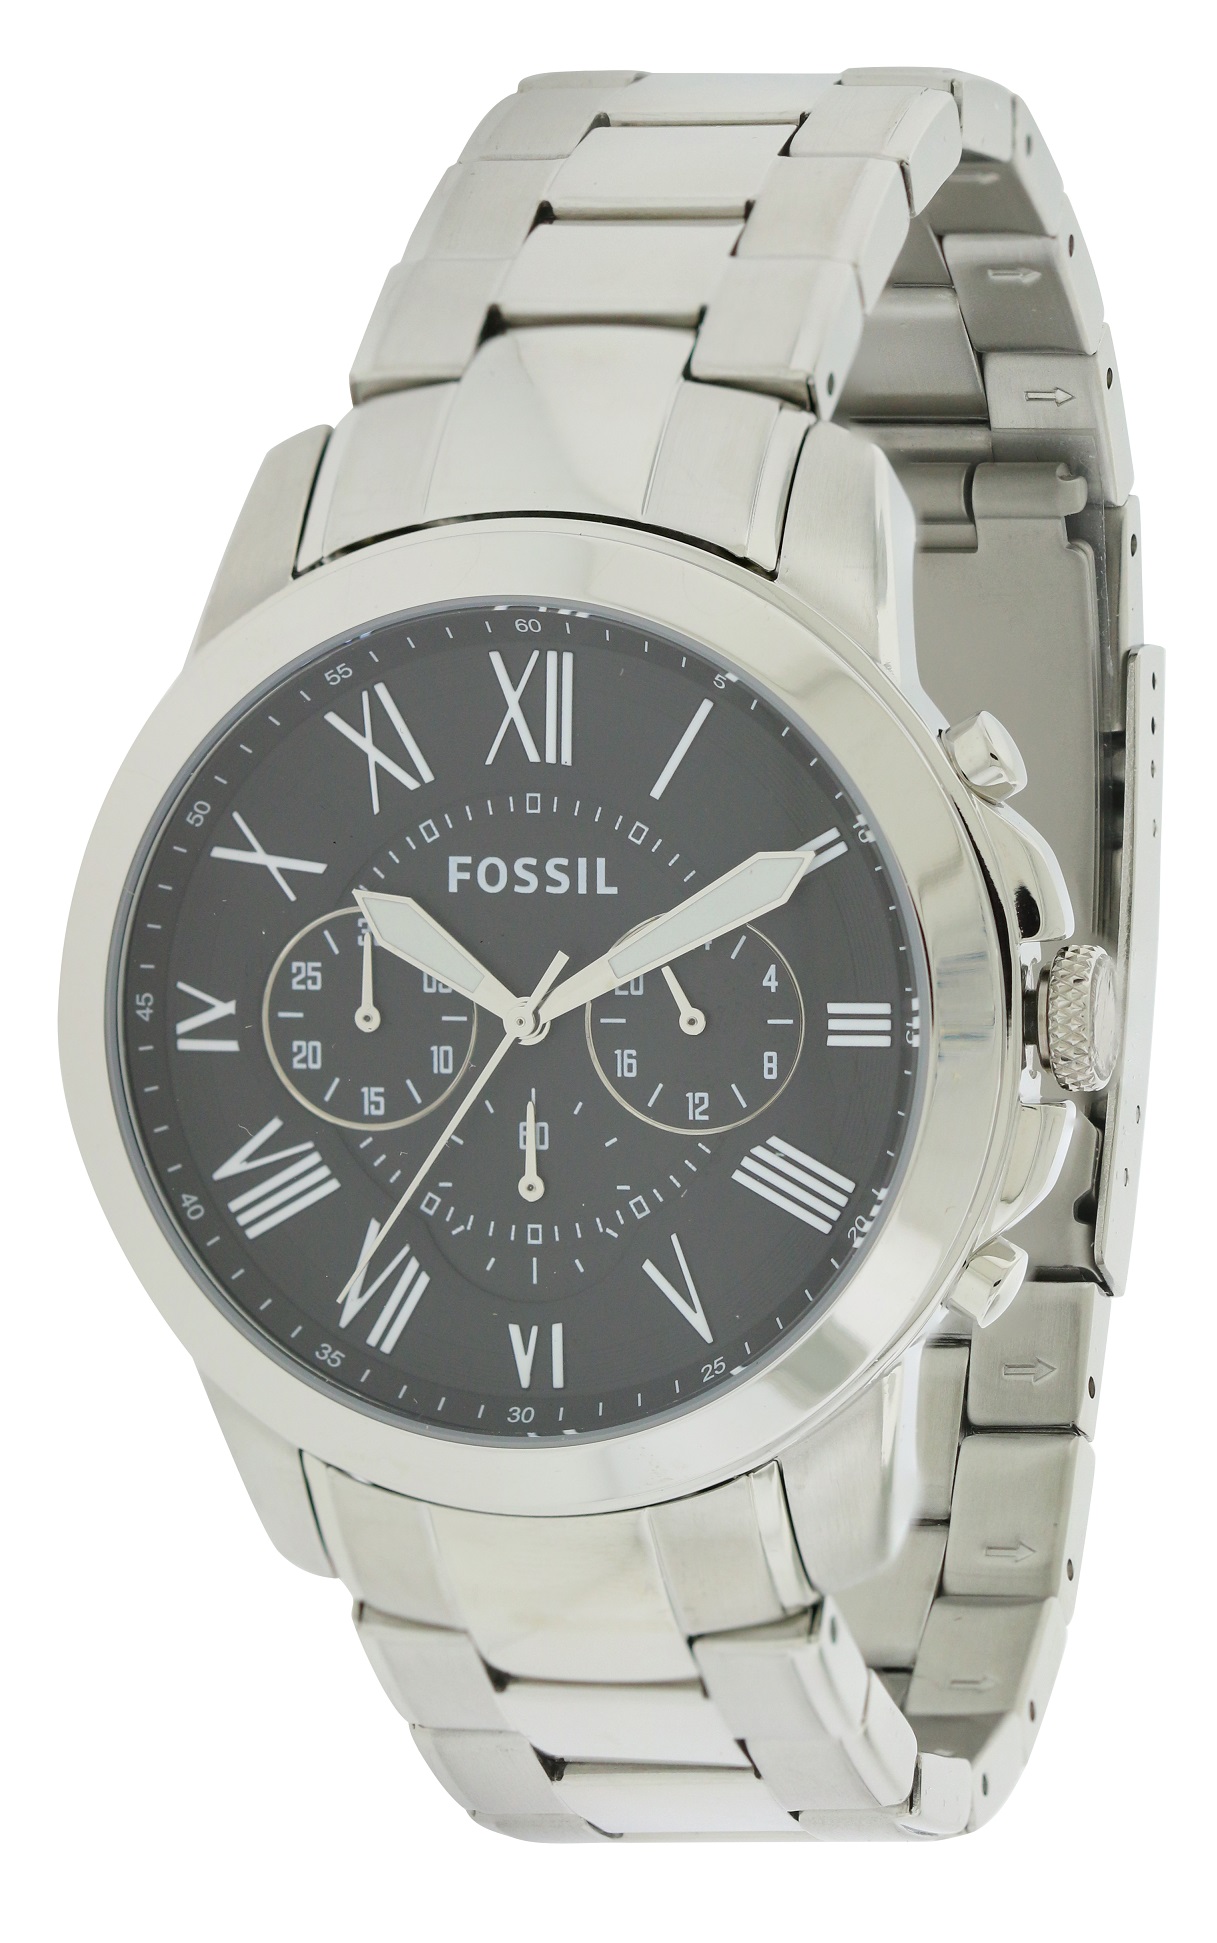 Fossil Grant Stainless Steel Chronograph Mens Watch FS4736 691464920814 Fossil Chronograph Stainless Steel Watch